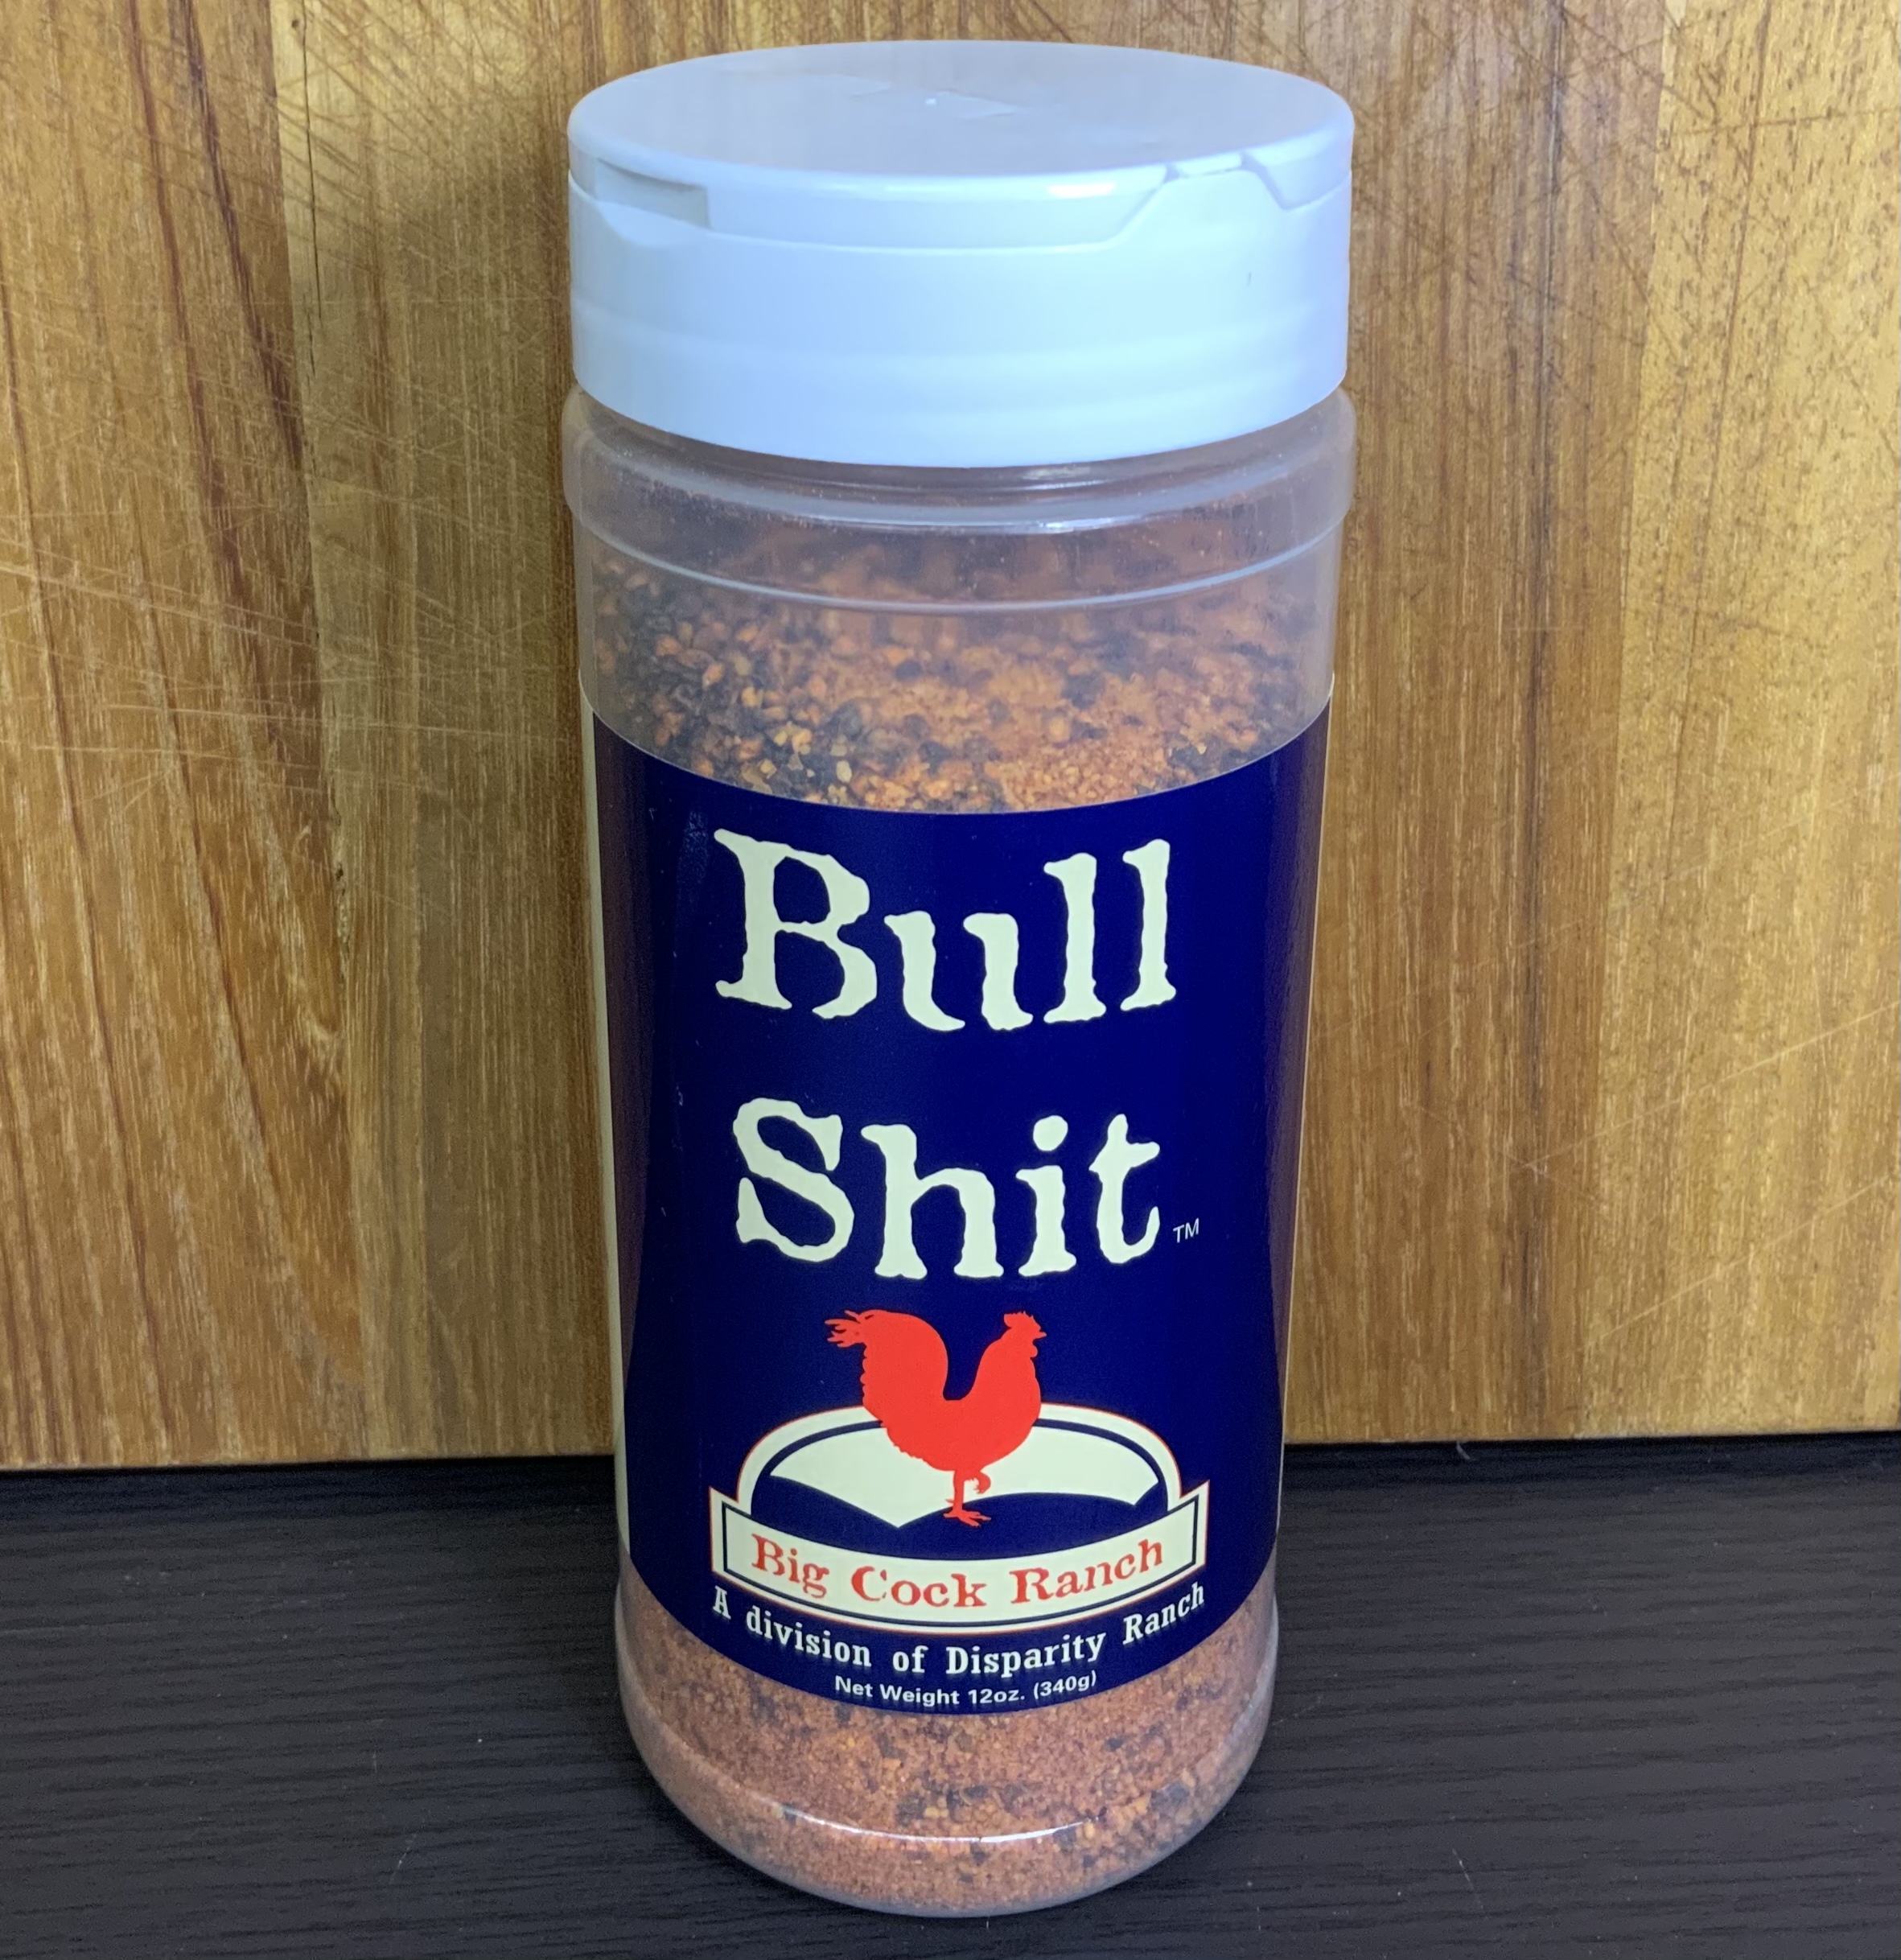 Special Shit: Bull Shit